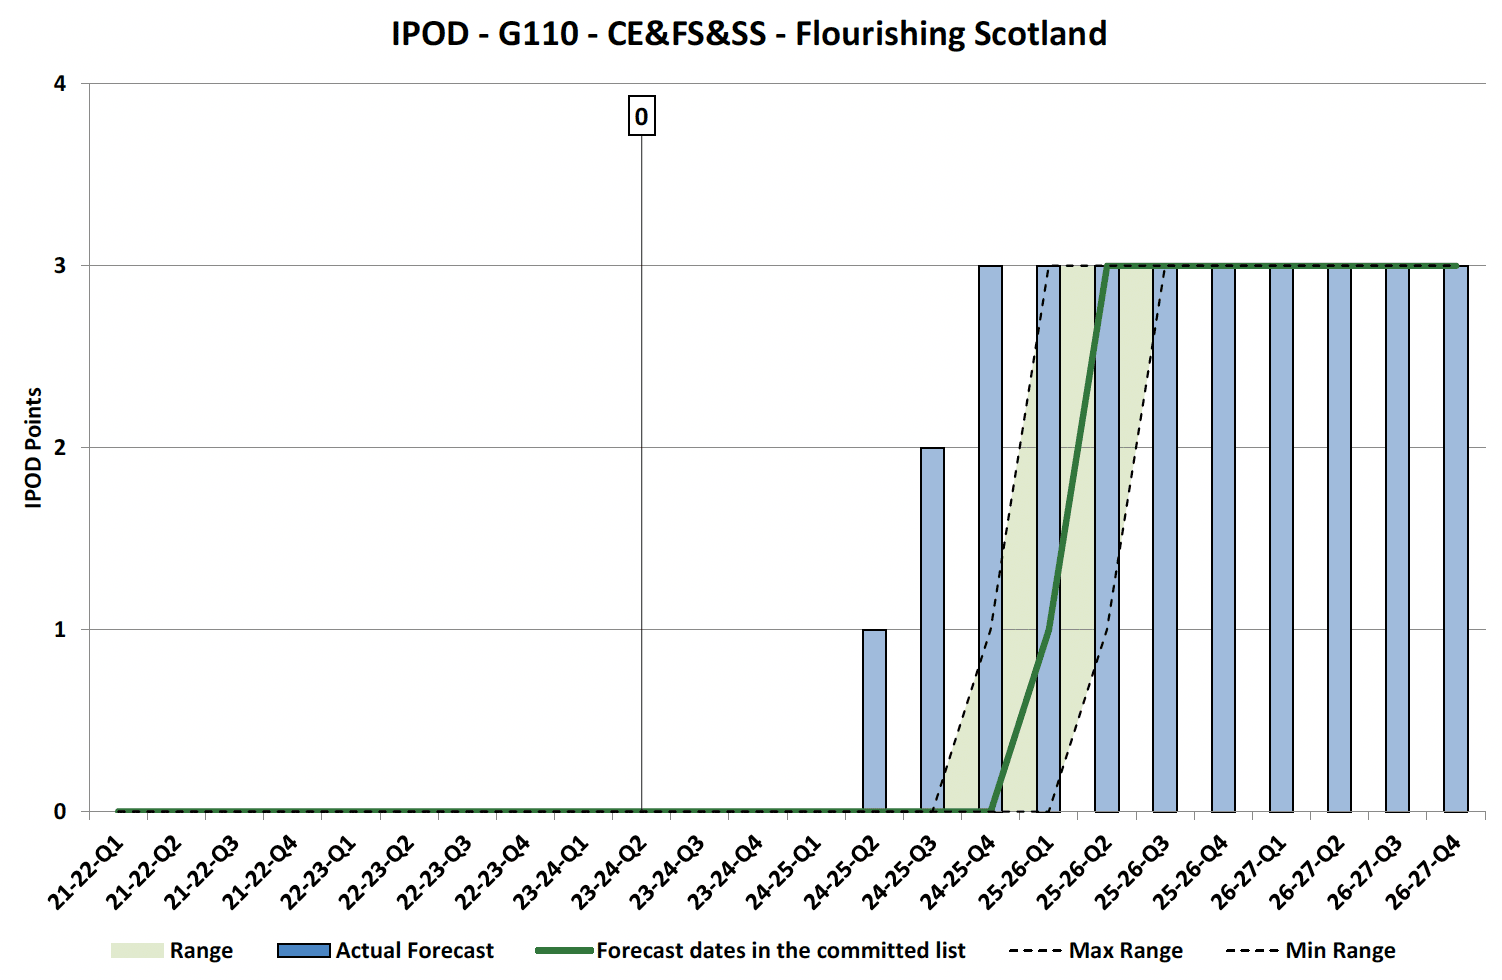 Chart showing IPOD points achieved or forecast for Financial Completion milestone against target range for Flourishing Scotland Projects in CE&FS&SS Portfolio